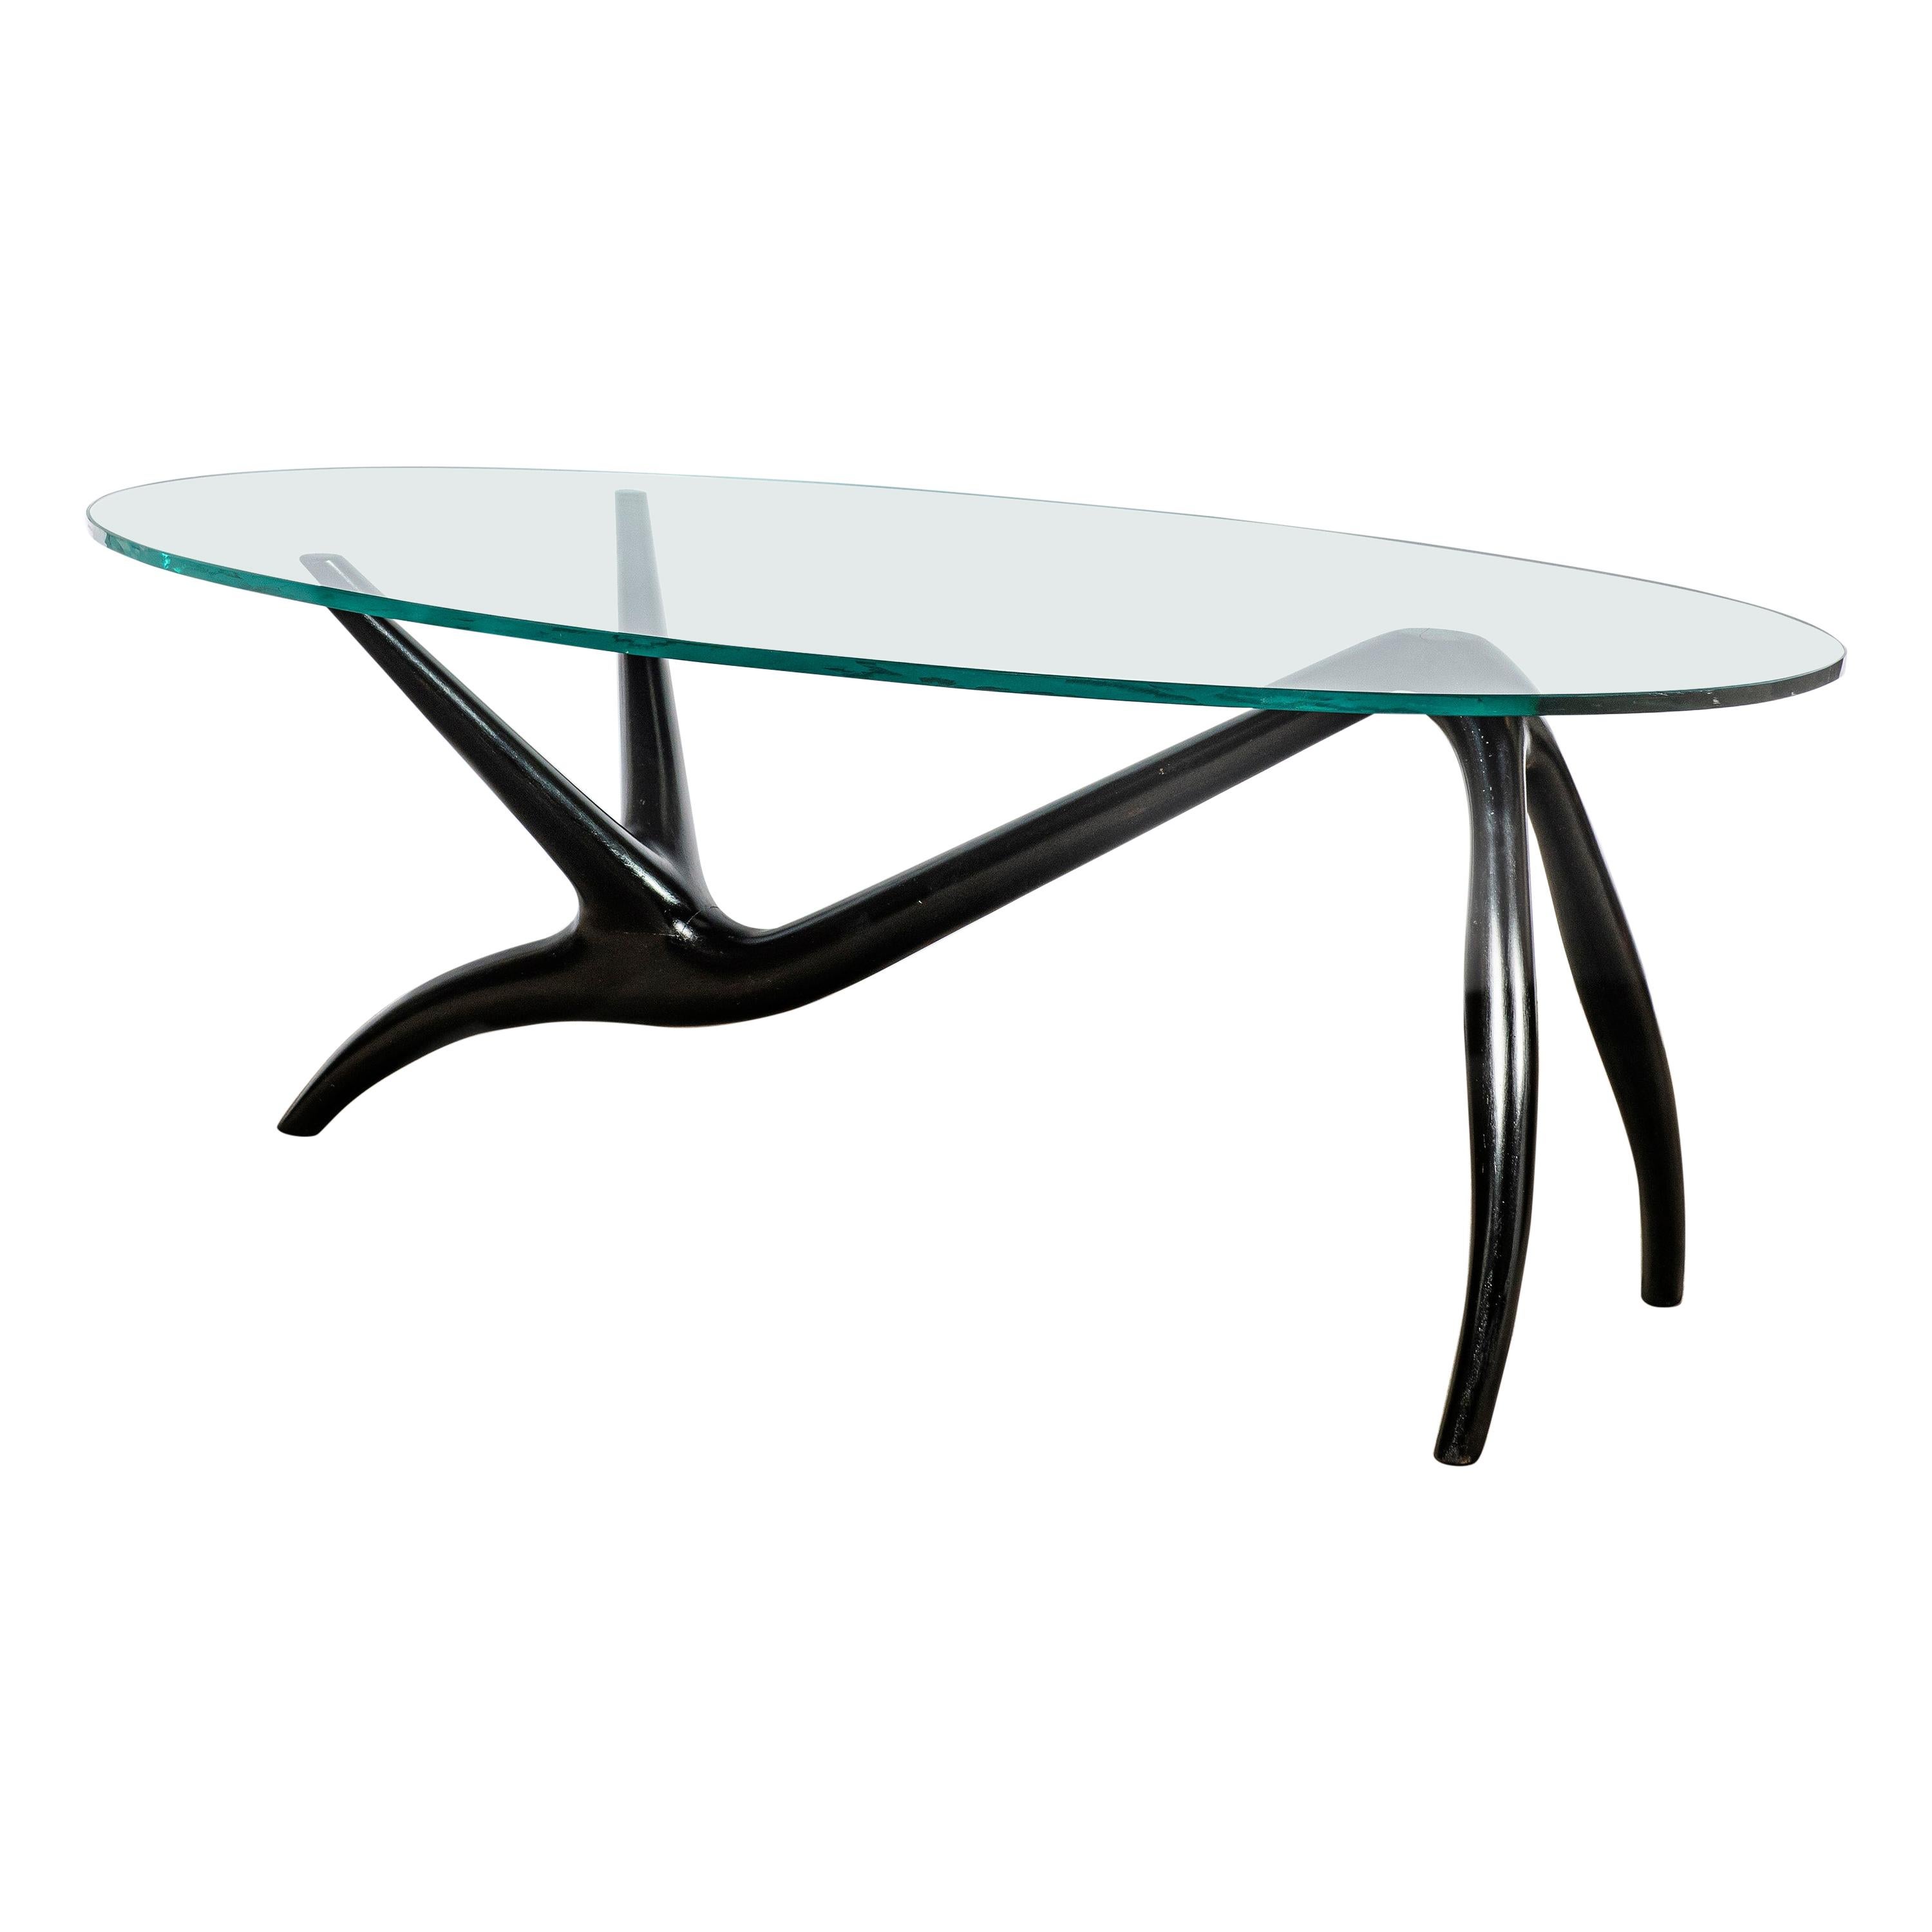 Painted Wood and Glass Low Table by Englander & Bonta, Argentina, circa 1950 For Sale